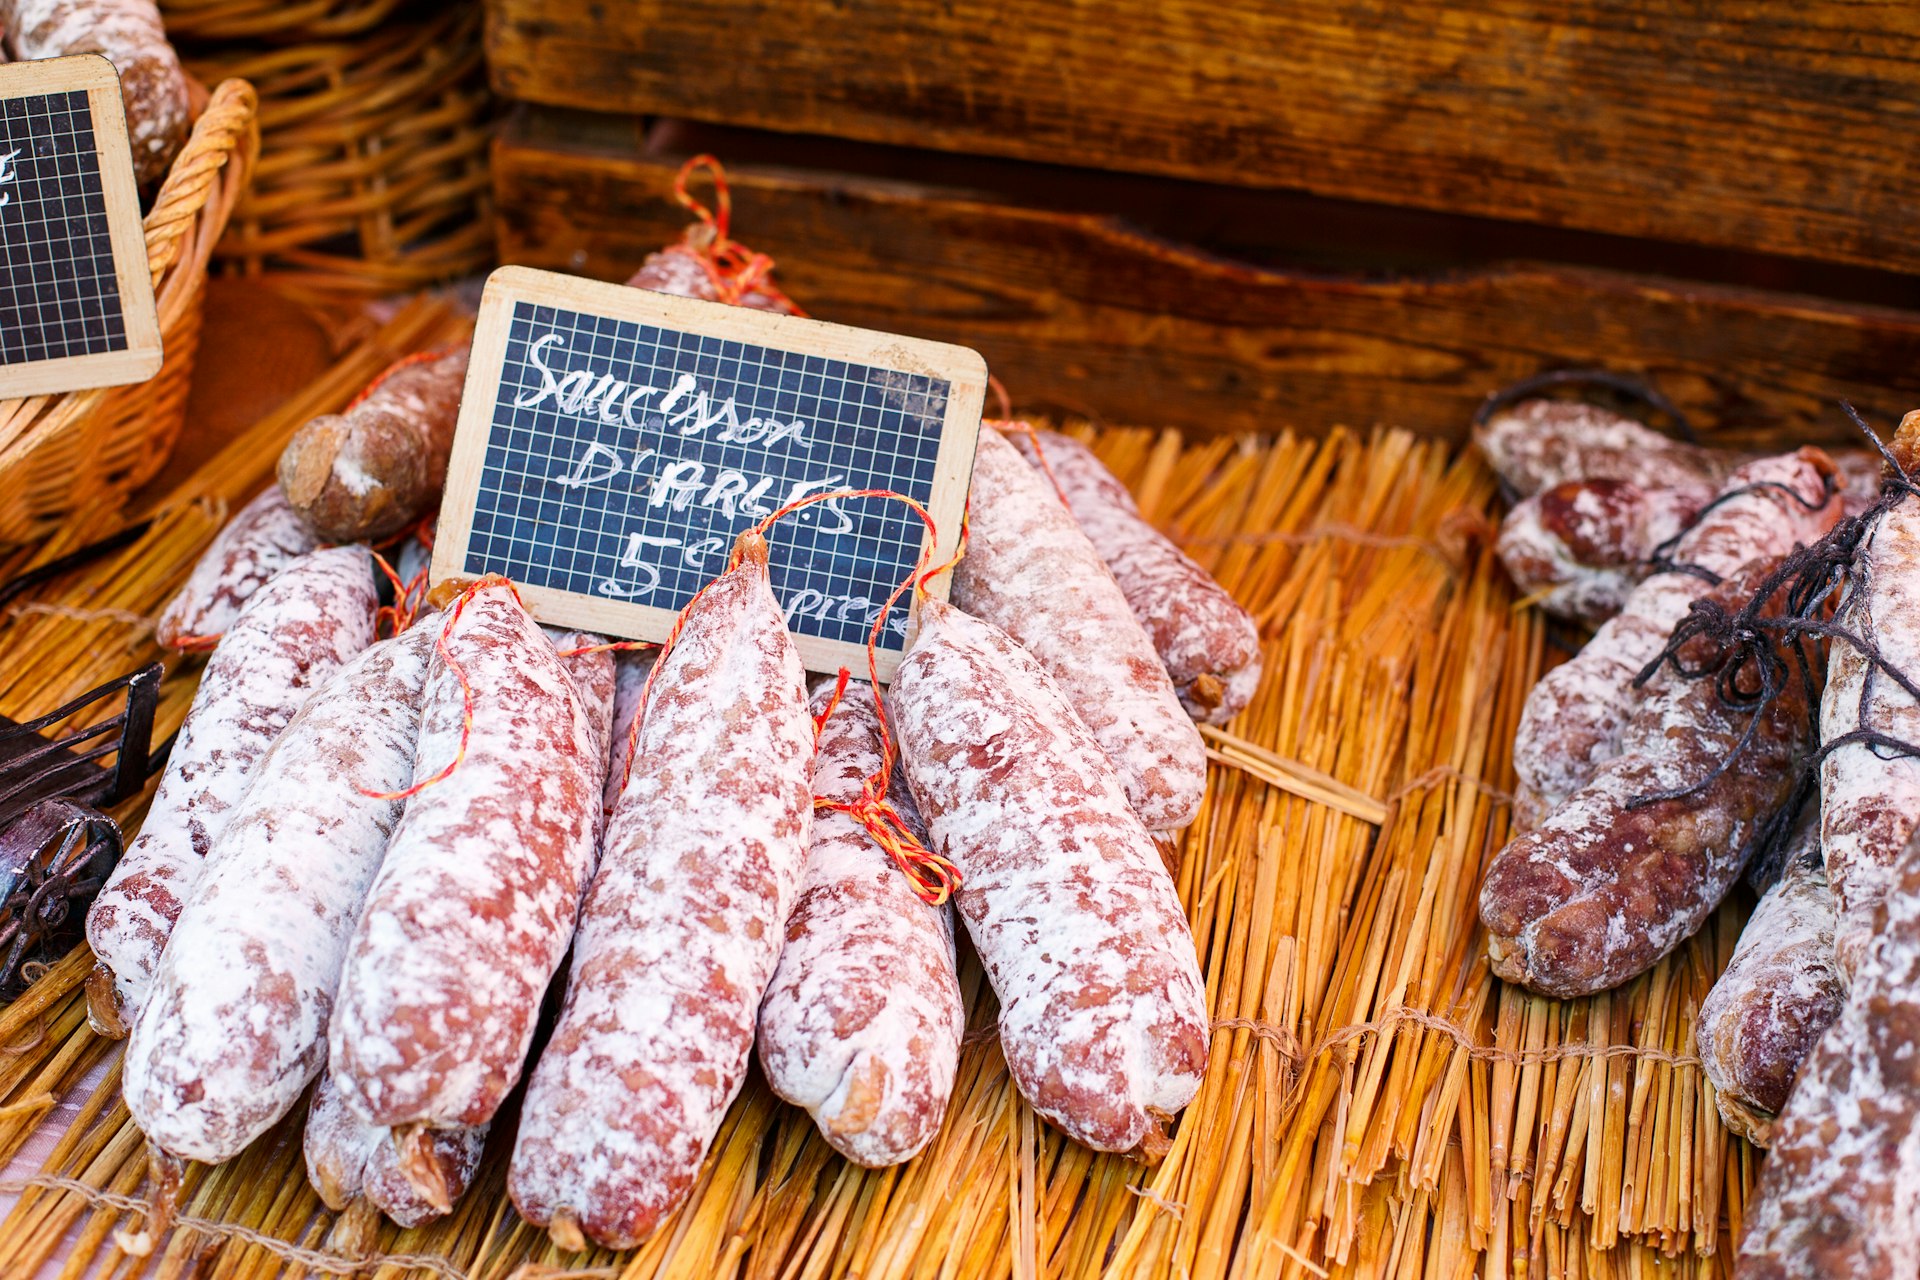 Saucissons for sale at Arles market. Image © romrodinka / iStock / Getty